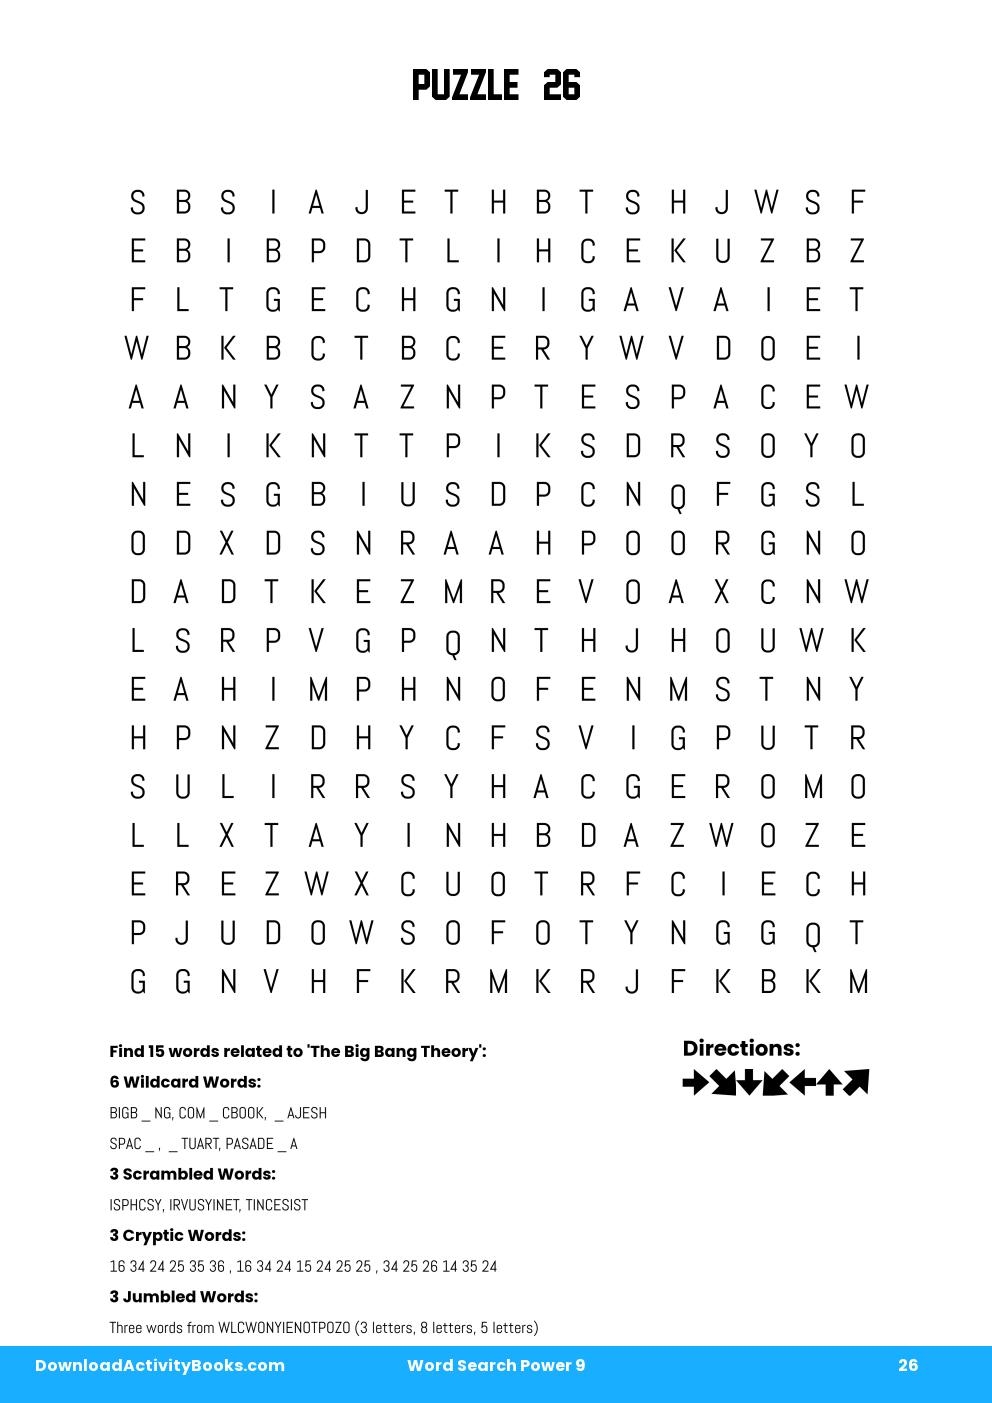 Word Search Power in Word Search Power 9